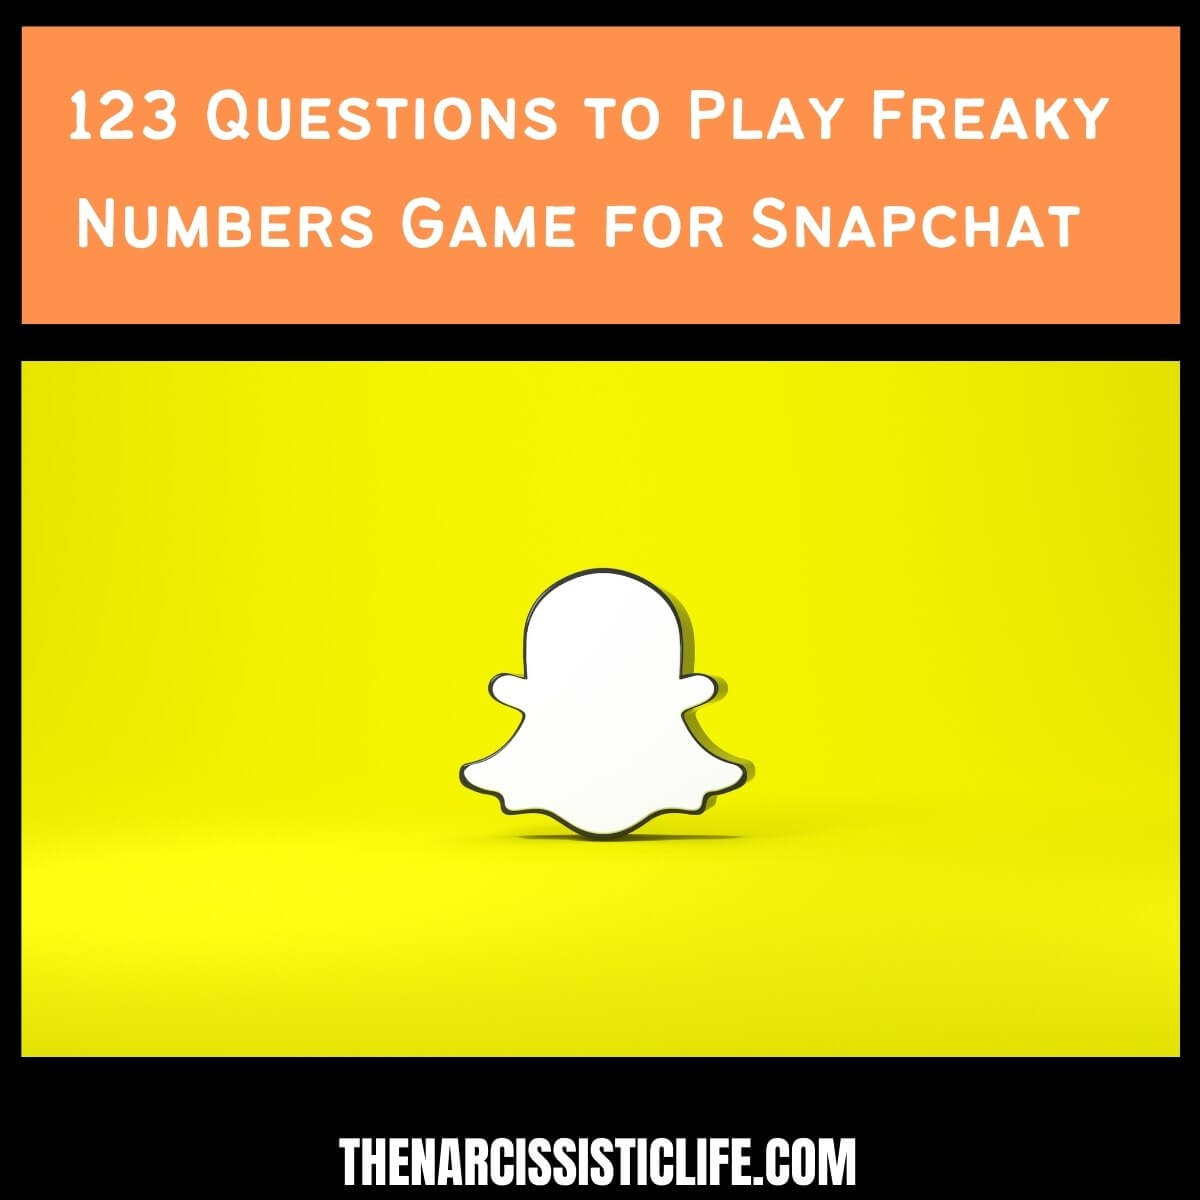 123 Questions to Play Freaky Numbers Game for Snapchat